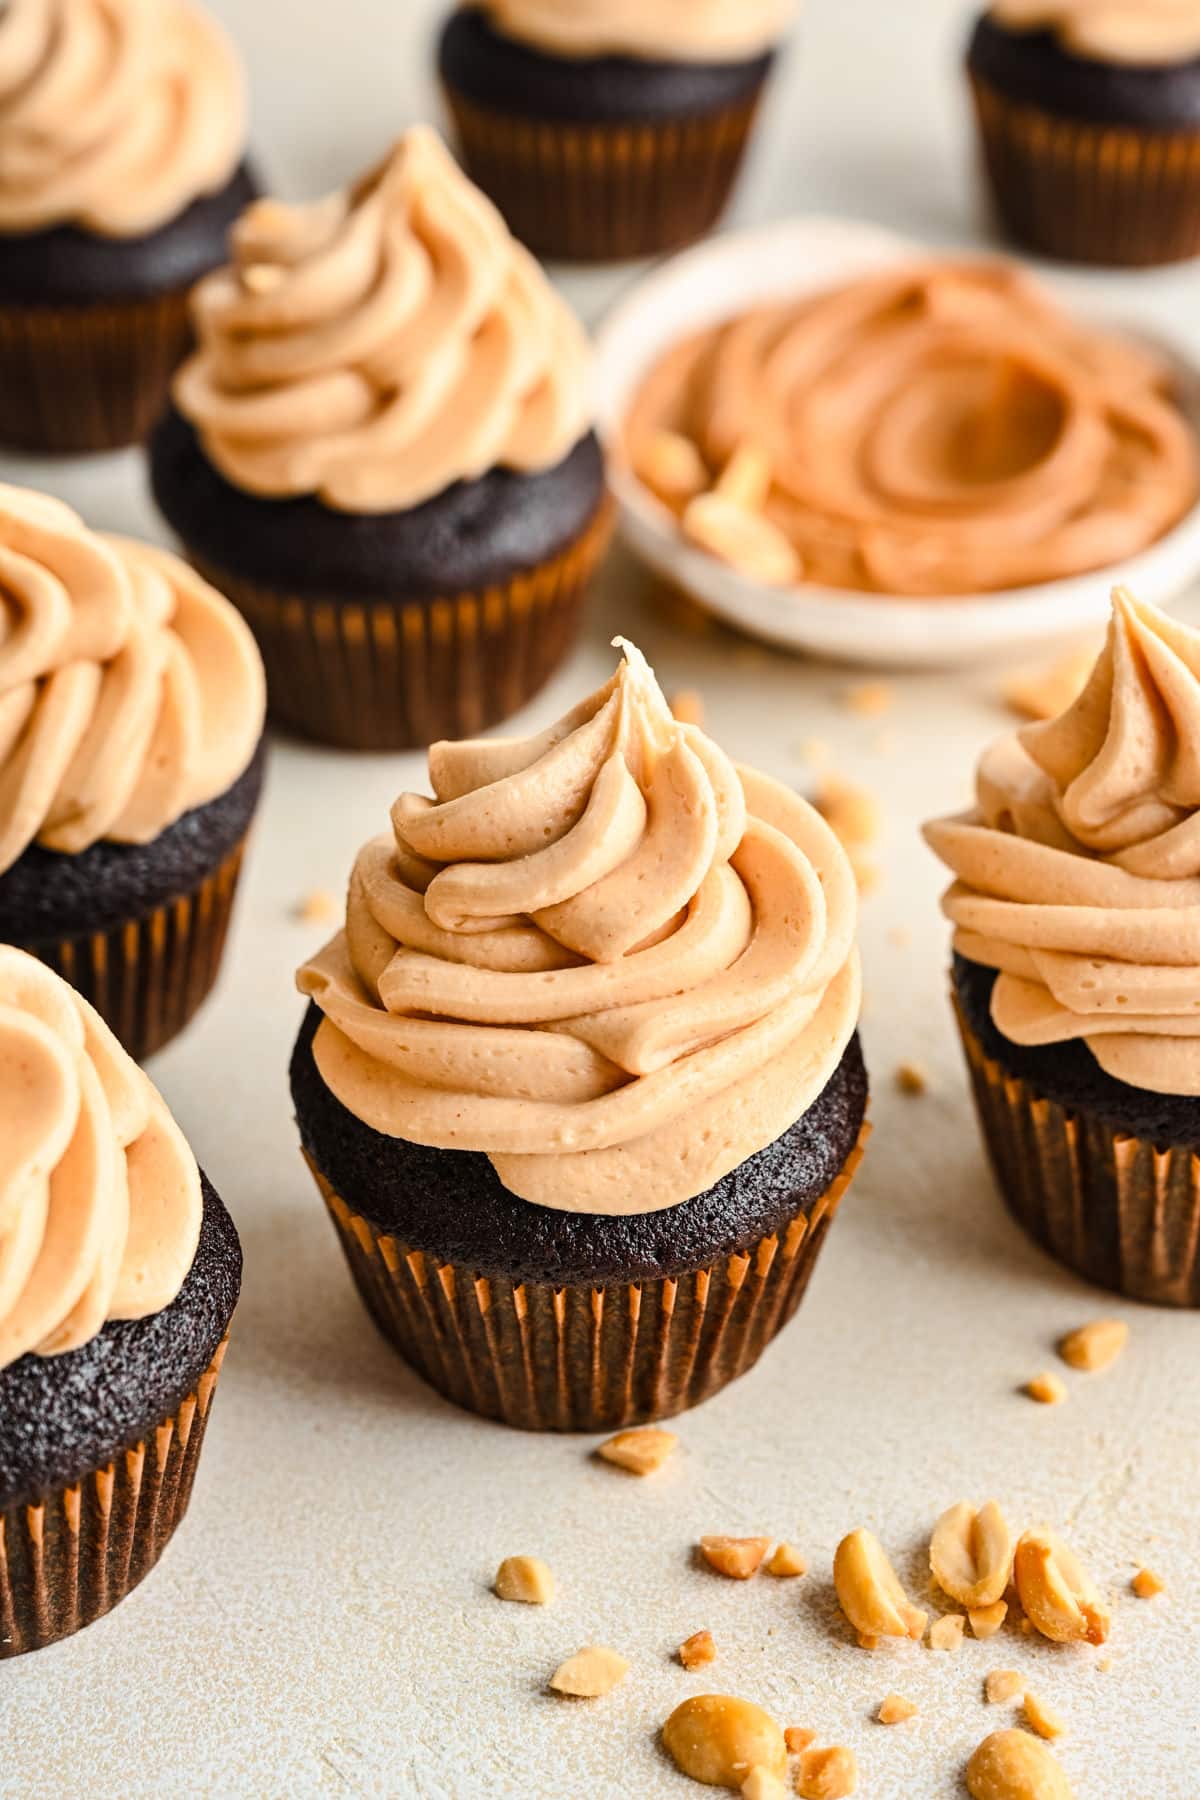 Peanut butter frosted chocolate cupcakes next to a dish of peanut butter.